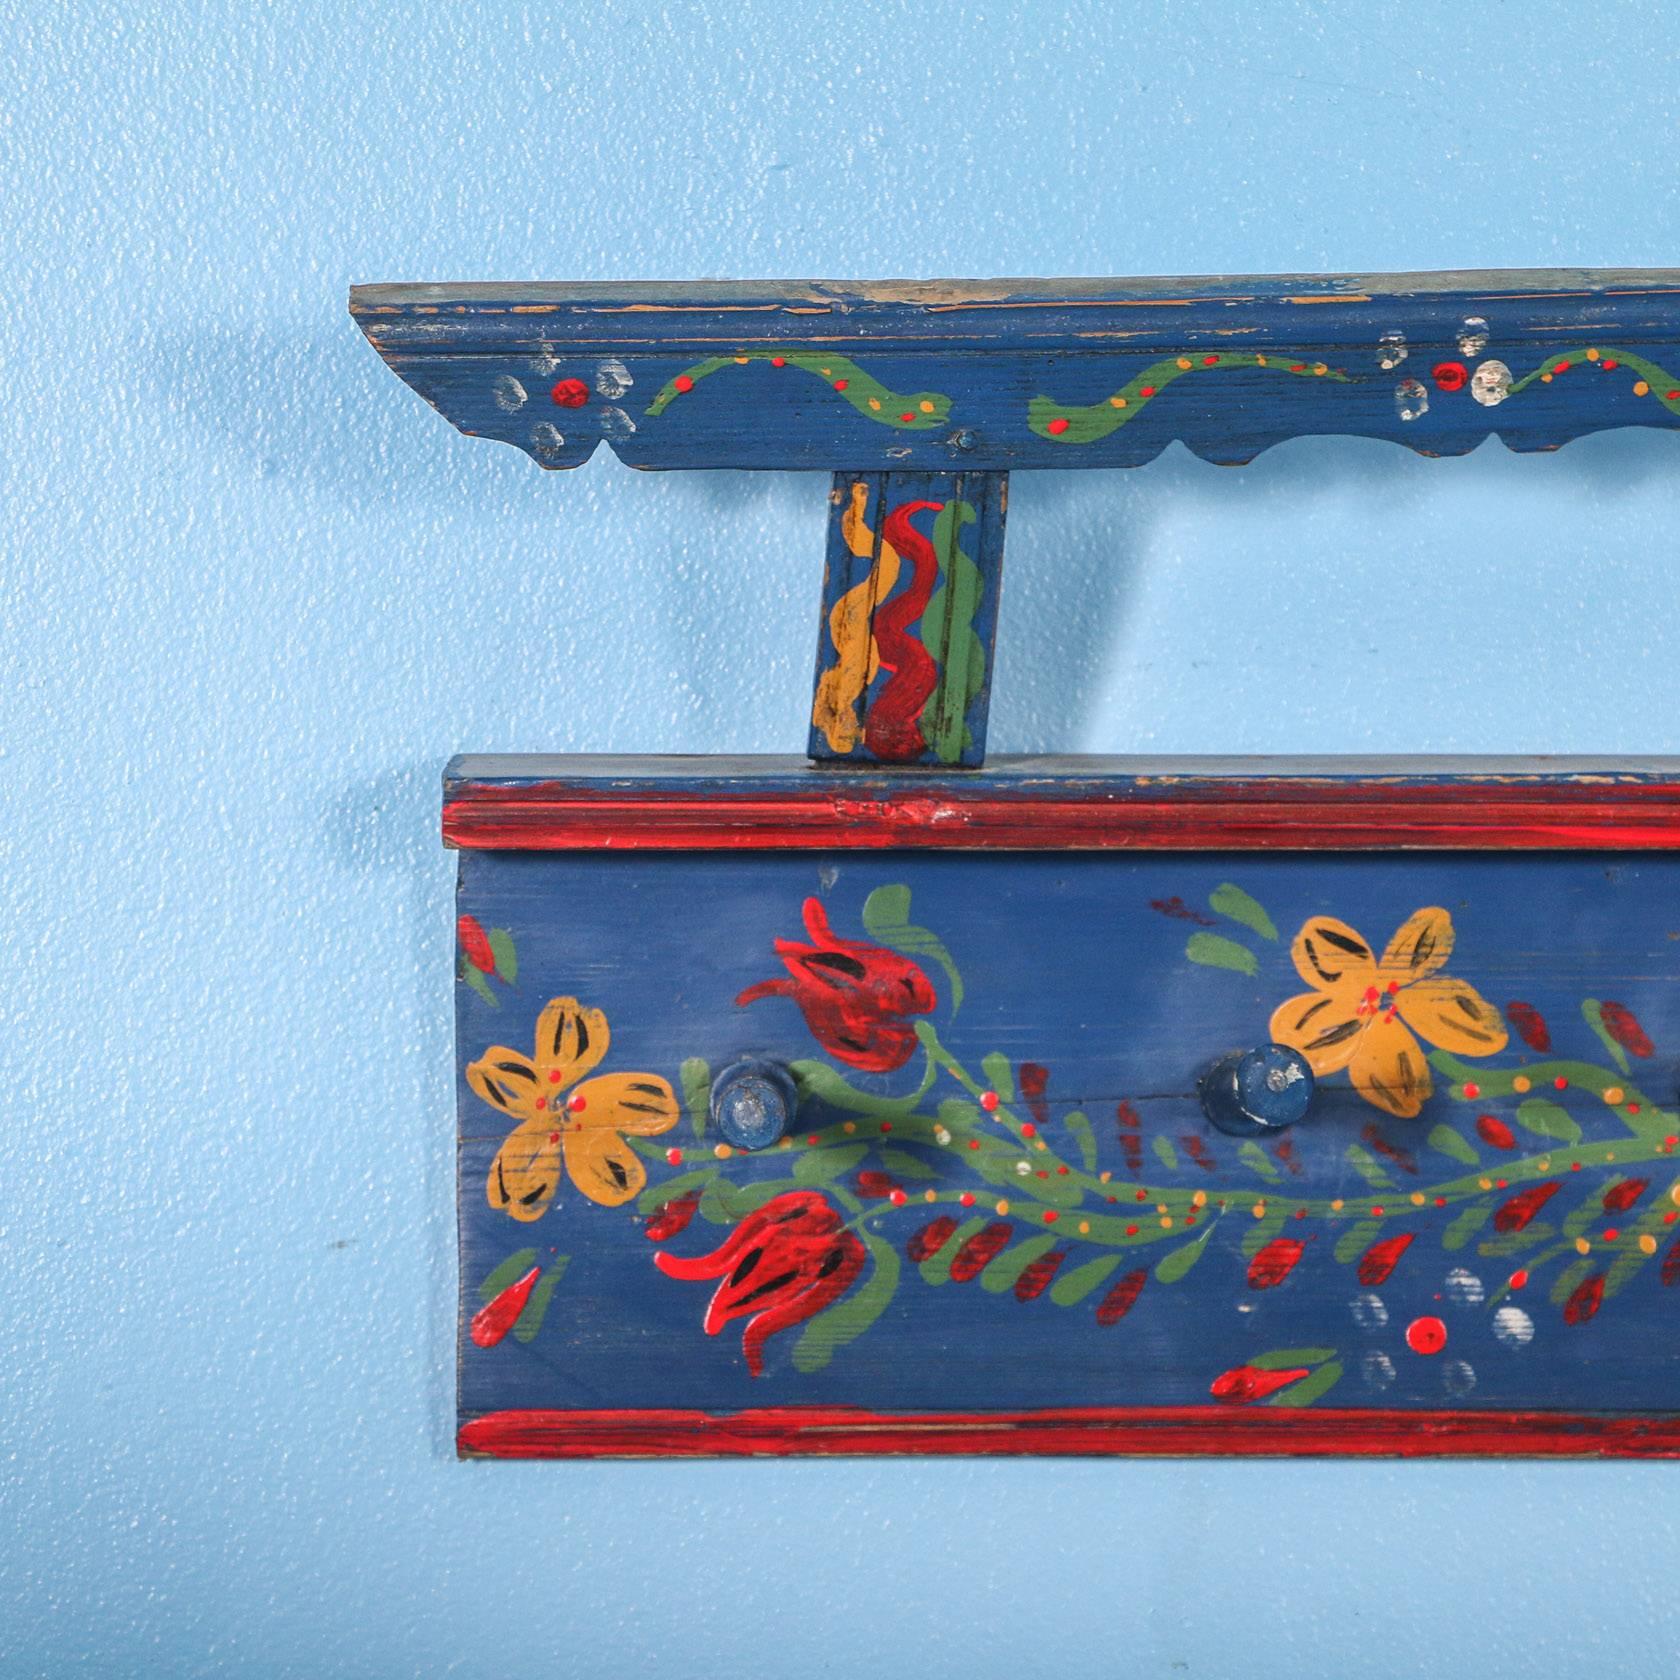 This long 8.5' hanging wall rack still maintains its vibrant blue and red paint, with folk art flowers strewn along the full length. The 17 wood pegs alternate between 5.25" and 4.75" long. The upper rack was originally used to display